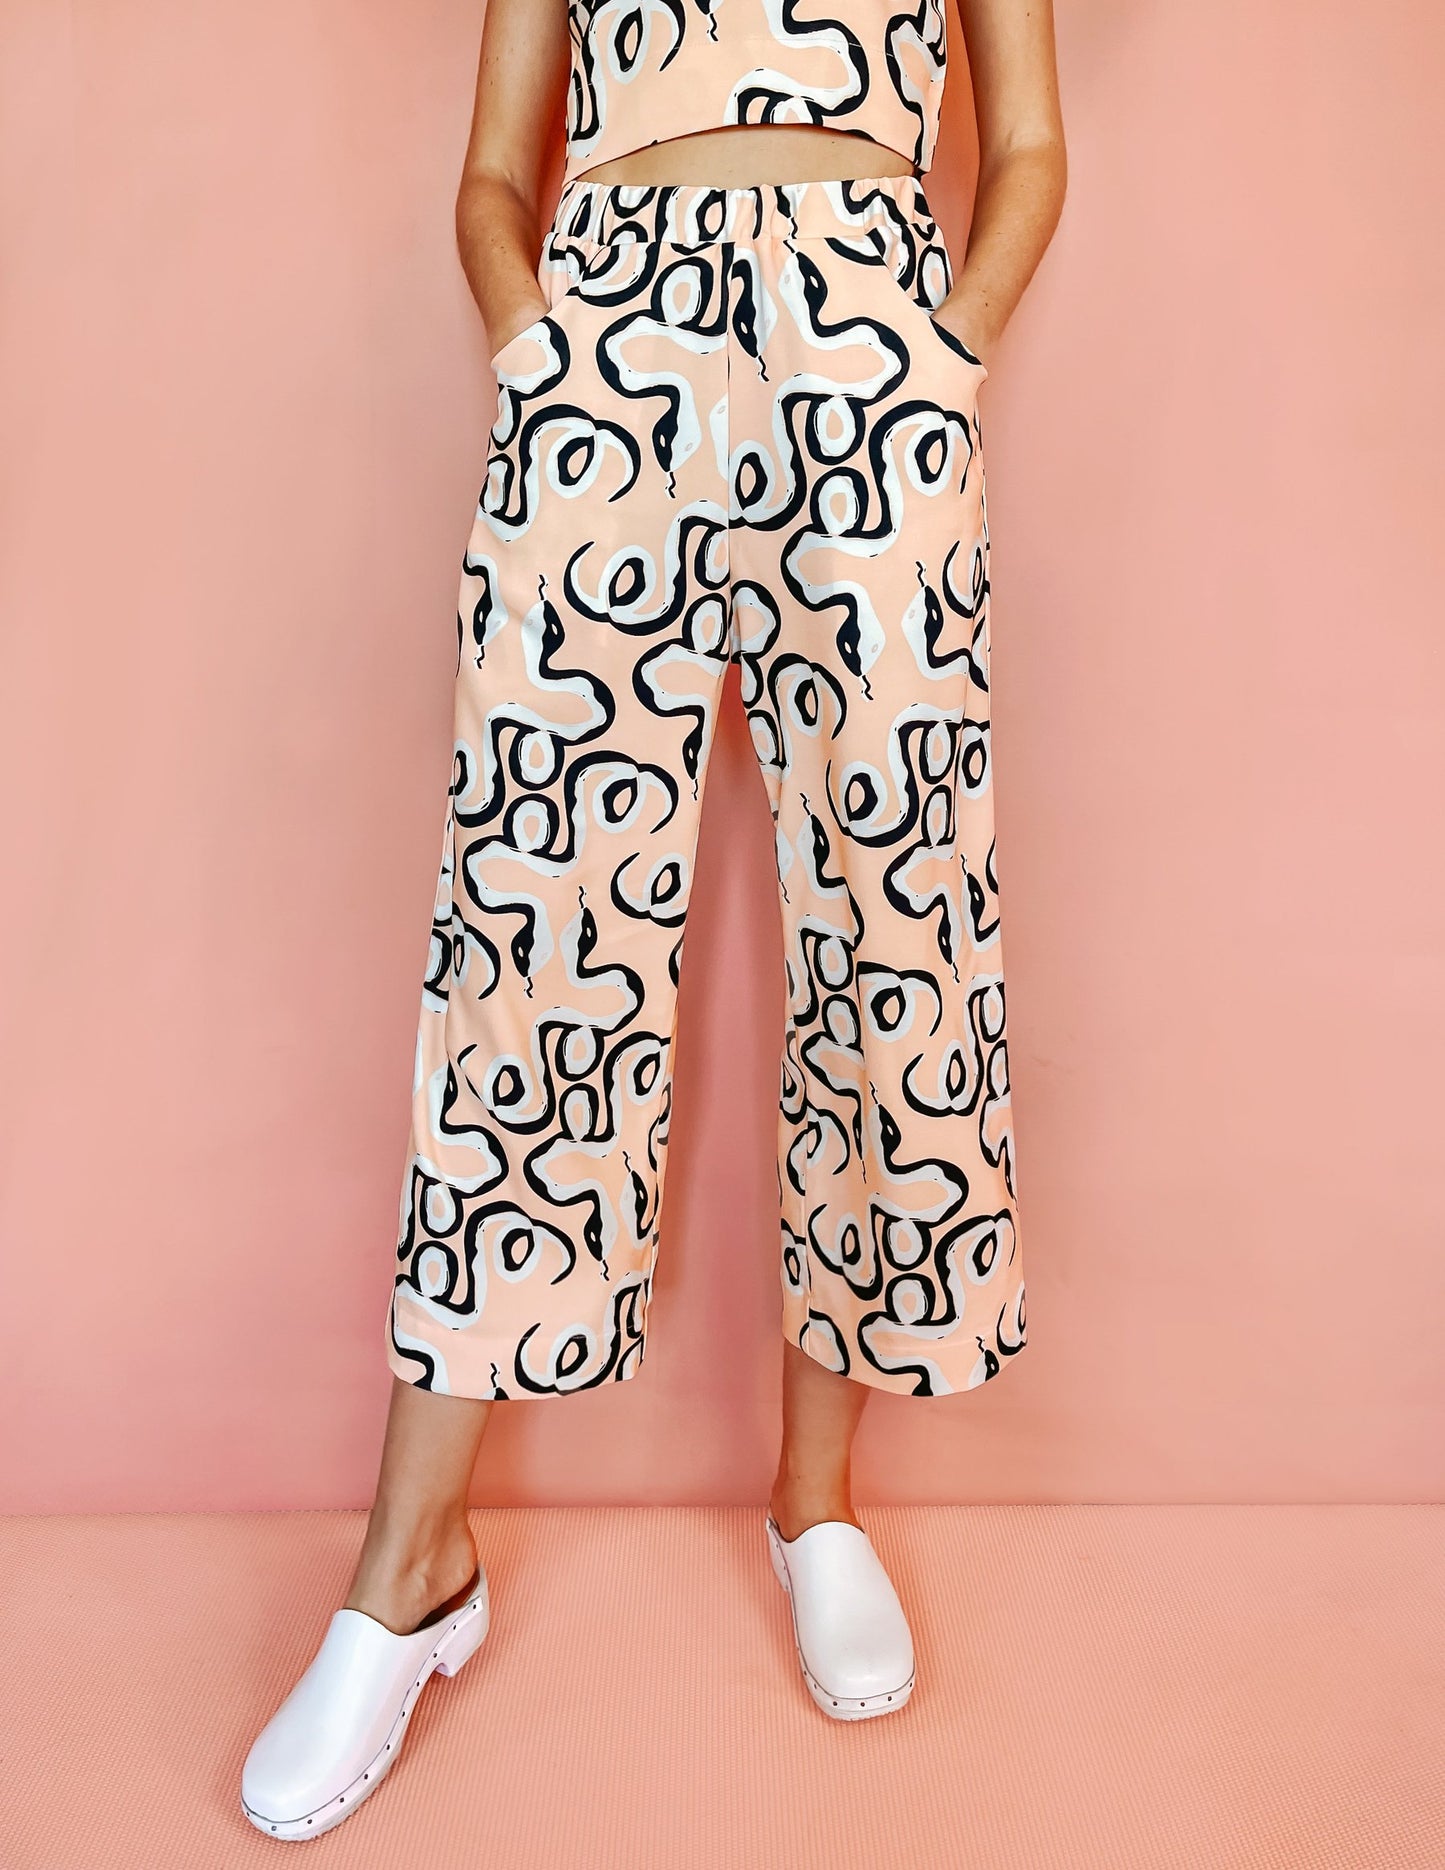 A woman wearing pink short trousers with a black abstract print on it